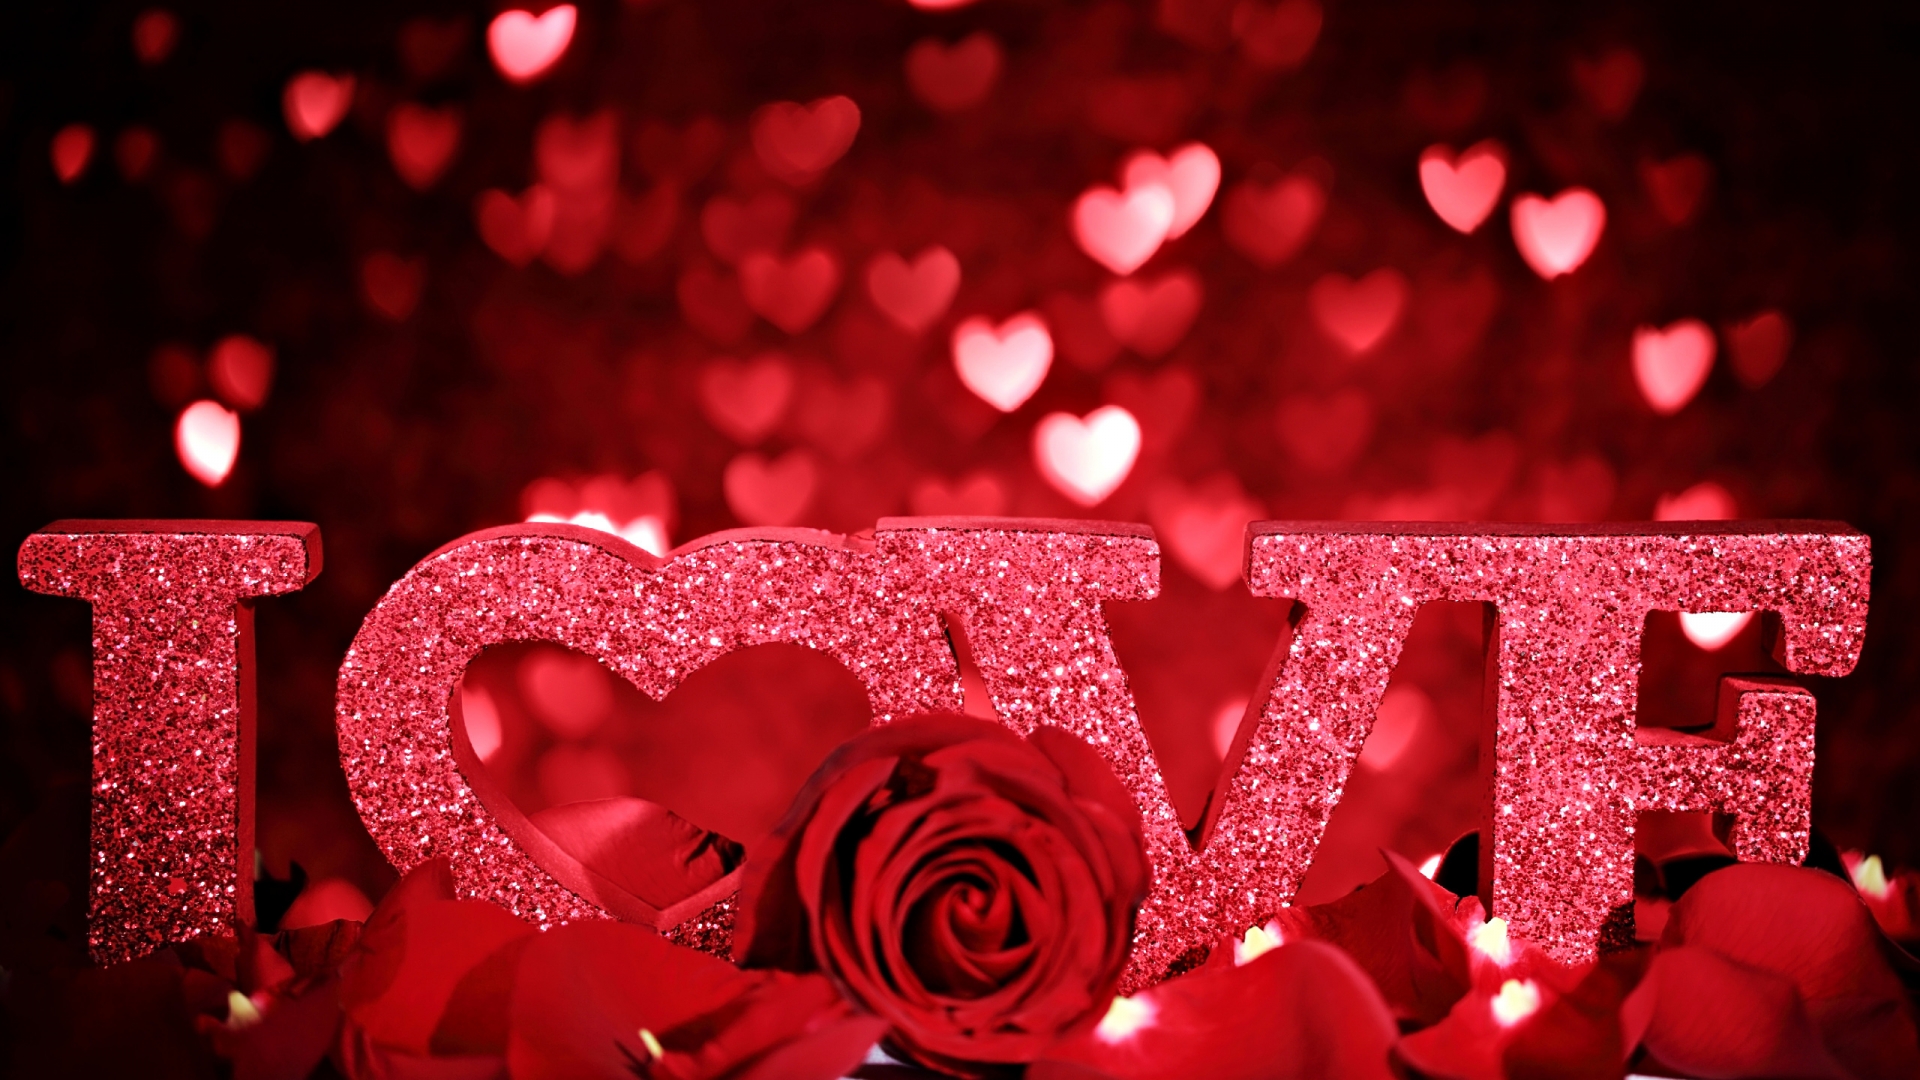 Red Roses Wallpapers HD A39 love roses